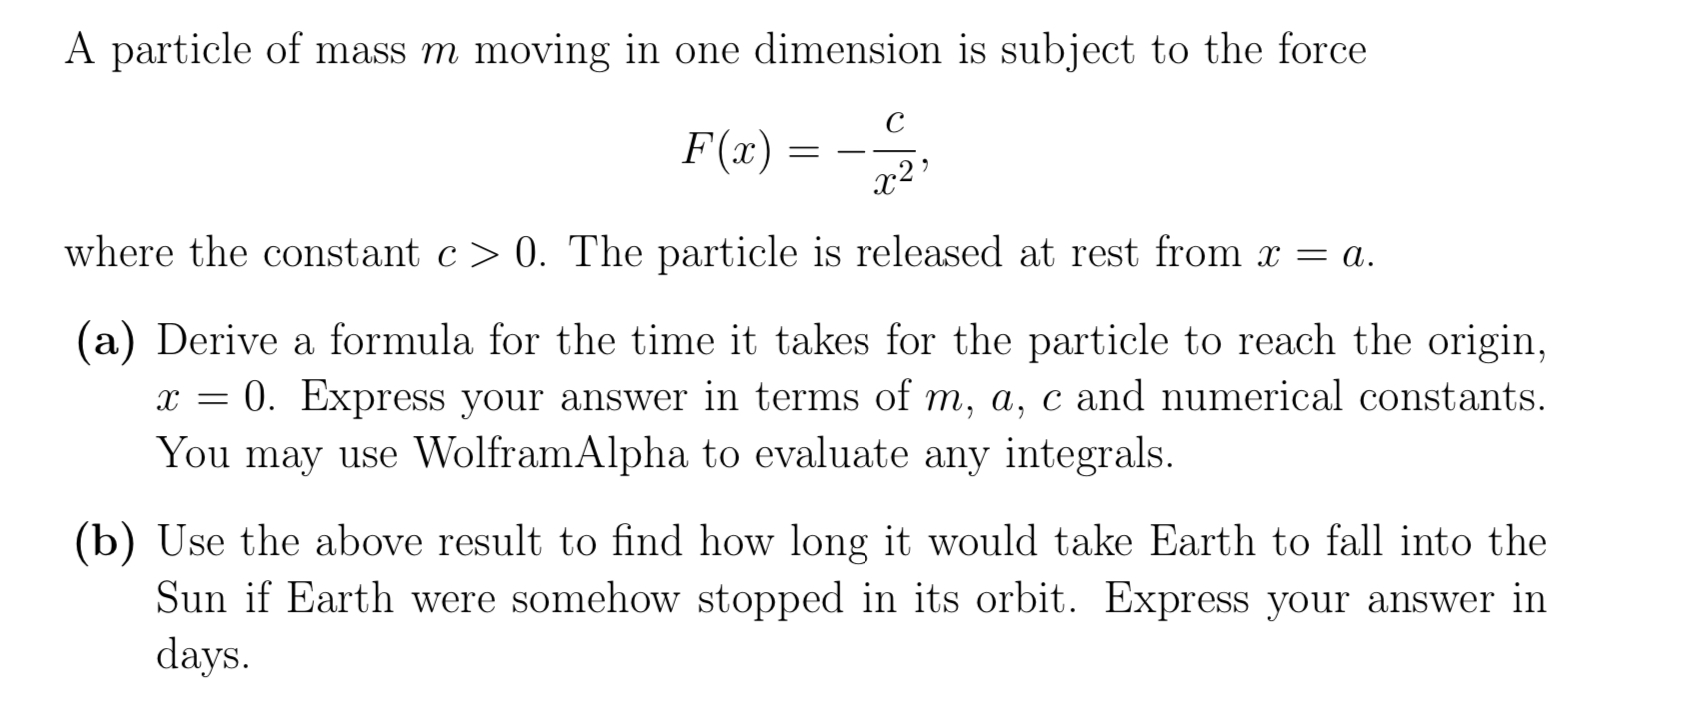 A particle of mass m moving in one dimension is subject to the force  F(x) = x2 where the constant c> 0. The